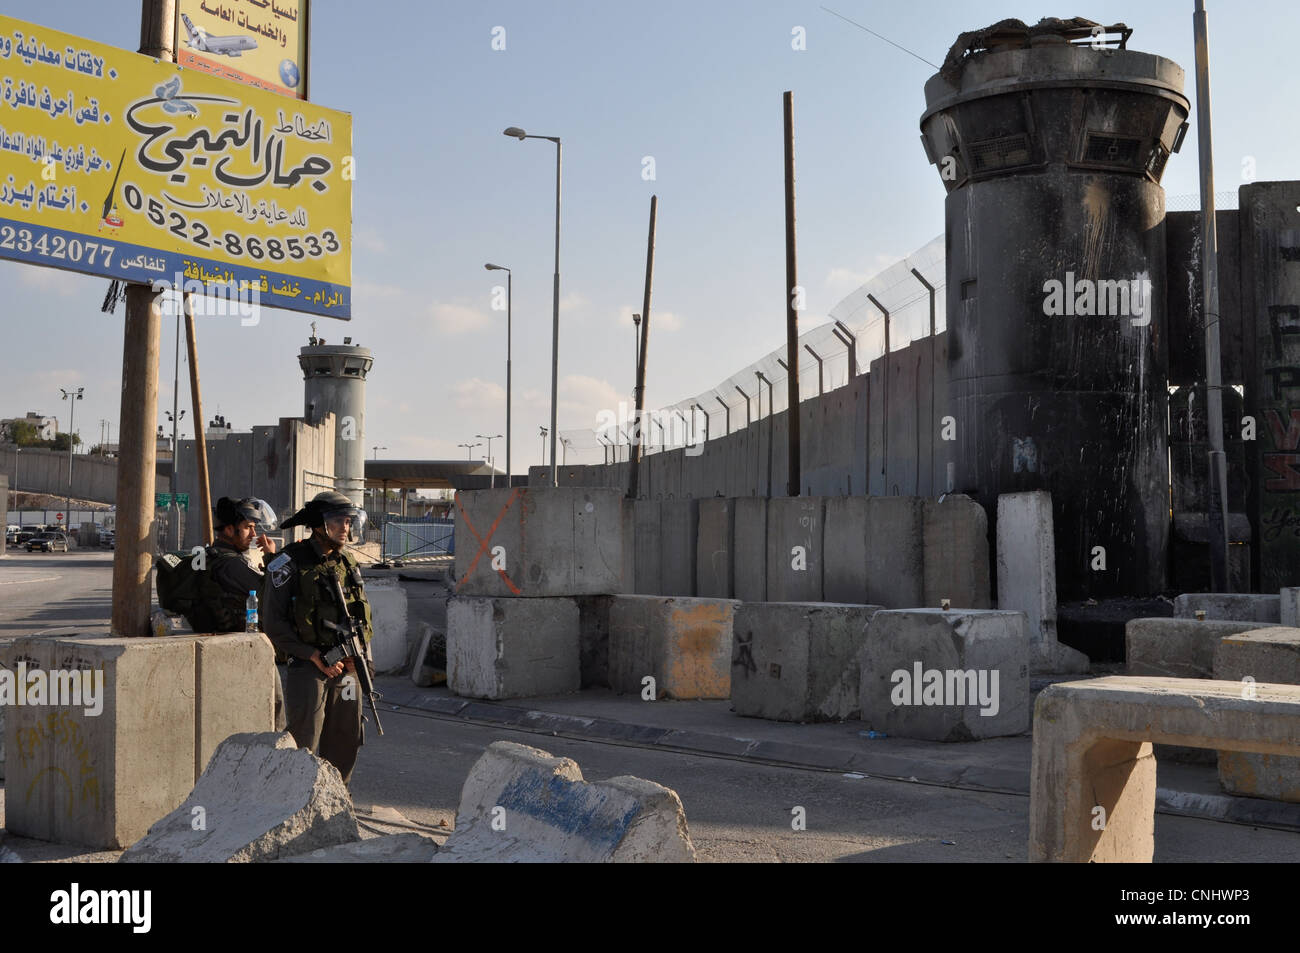 Israeli soldiers at the Qalandiya checkpoint during Land Day protests, March 30 2012 shelter by the apartheid wall or barrier Stock Photo